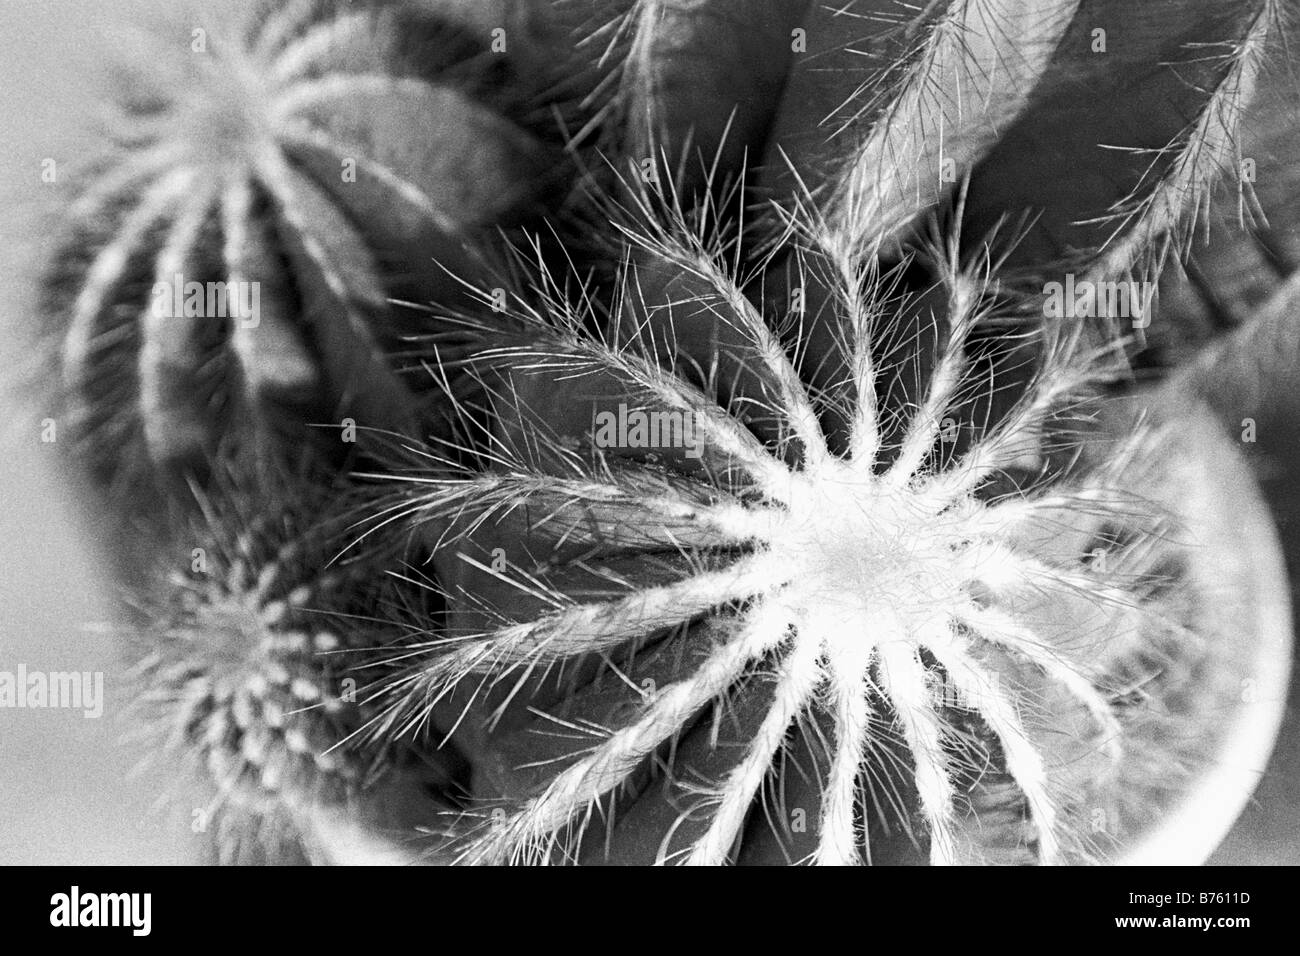 Cactus closeup in greenhouse in black and white. Stock Photo